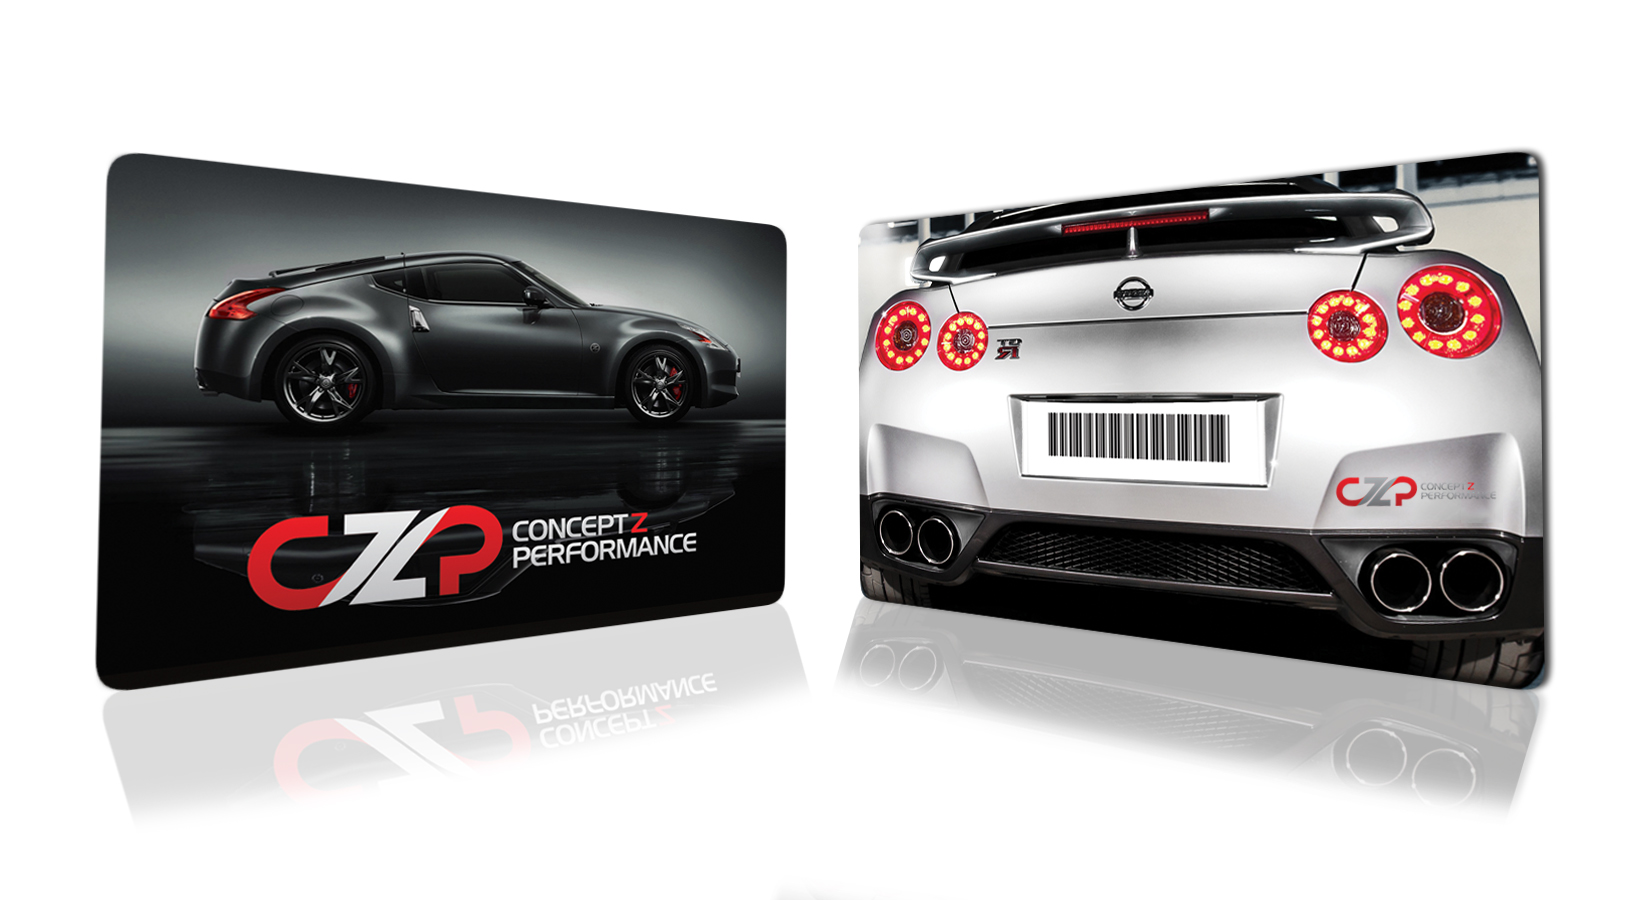 Concept Z Performance Gift Card [Email With Digital Code]